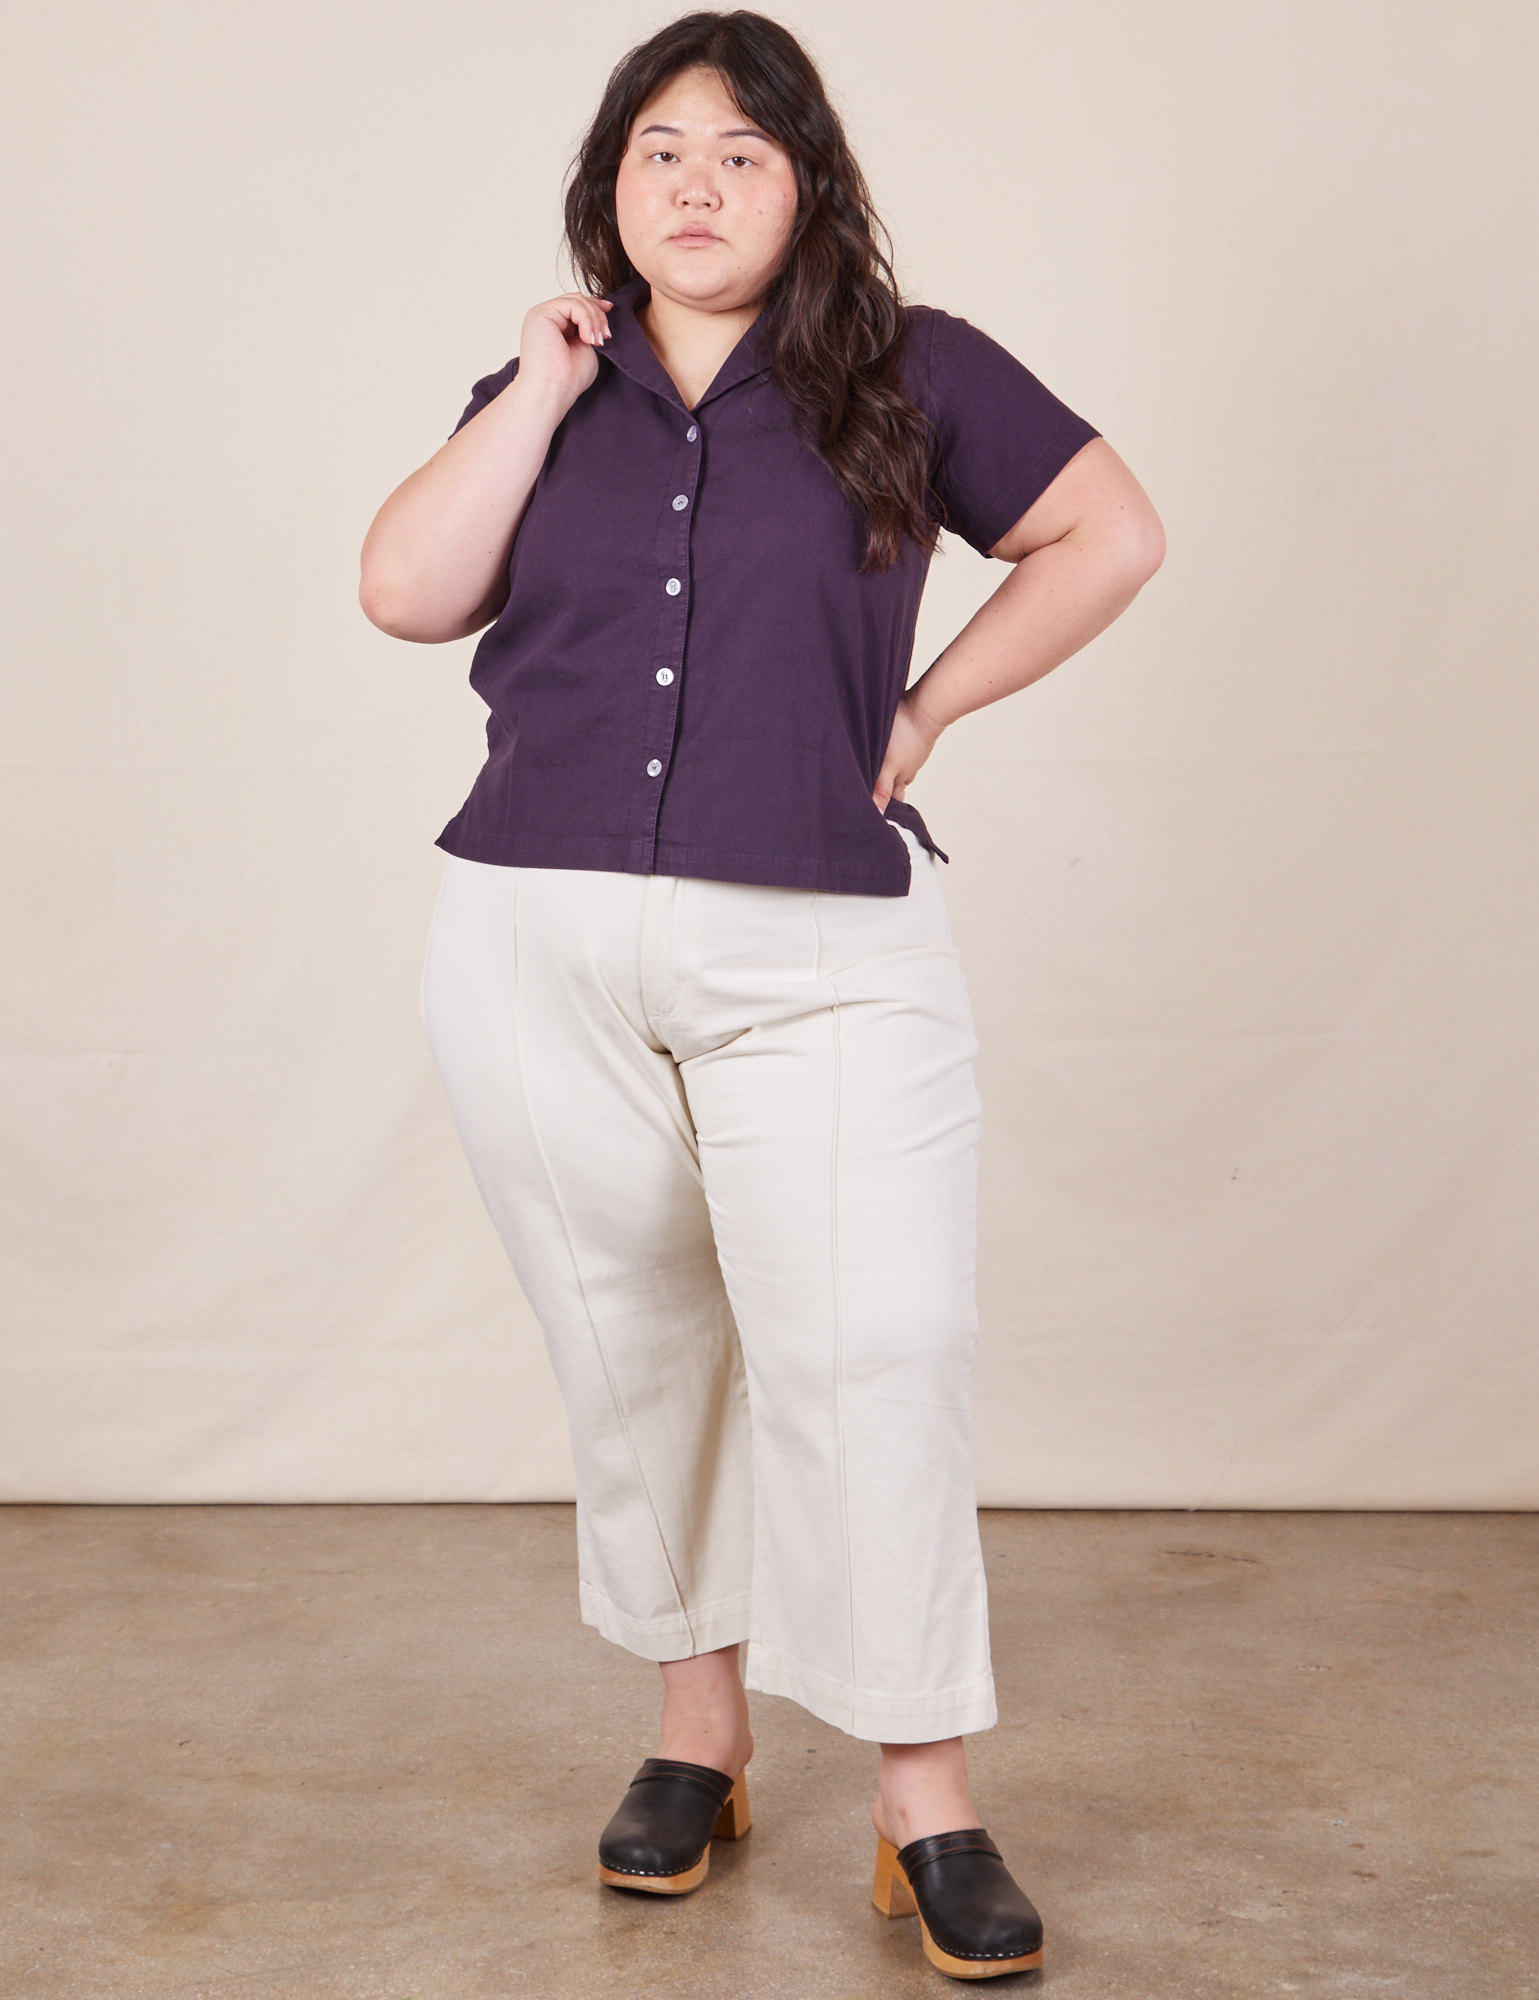 Alex is wearing Pantry Button-Up in Nebula Purple and vintage off-white petite Western Pants